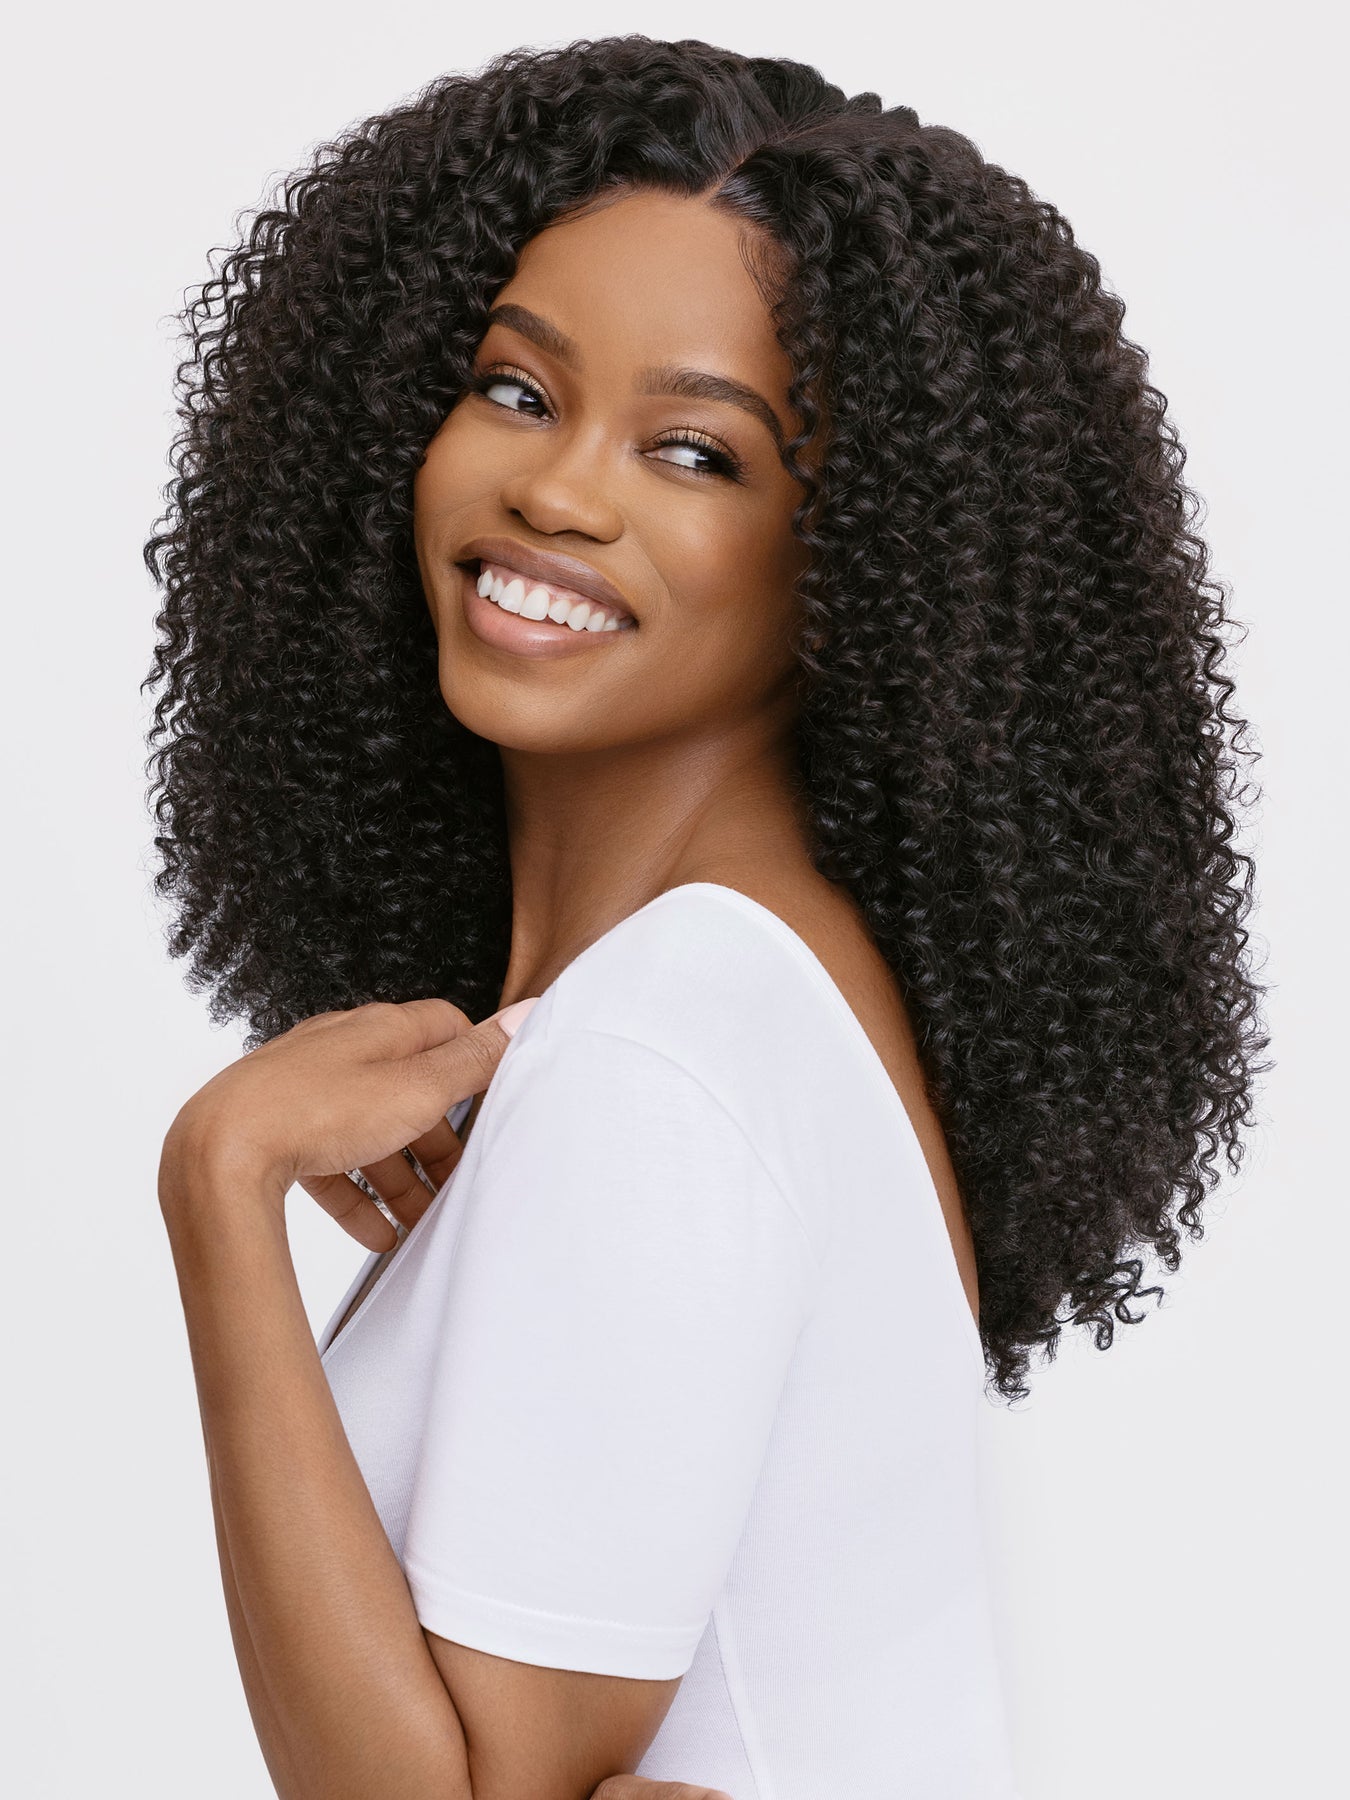 DIY Solutions for Curly Coily Hair